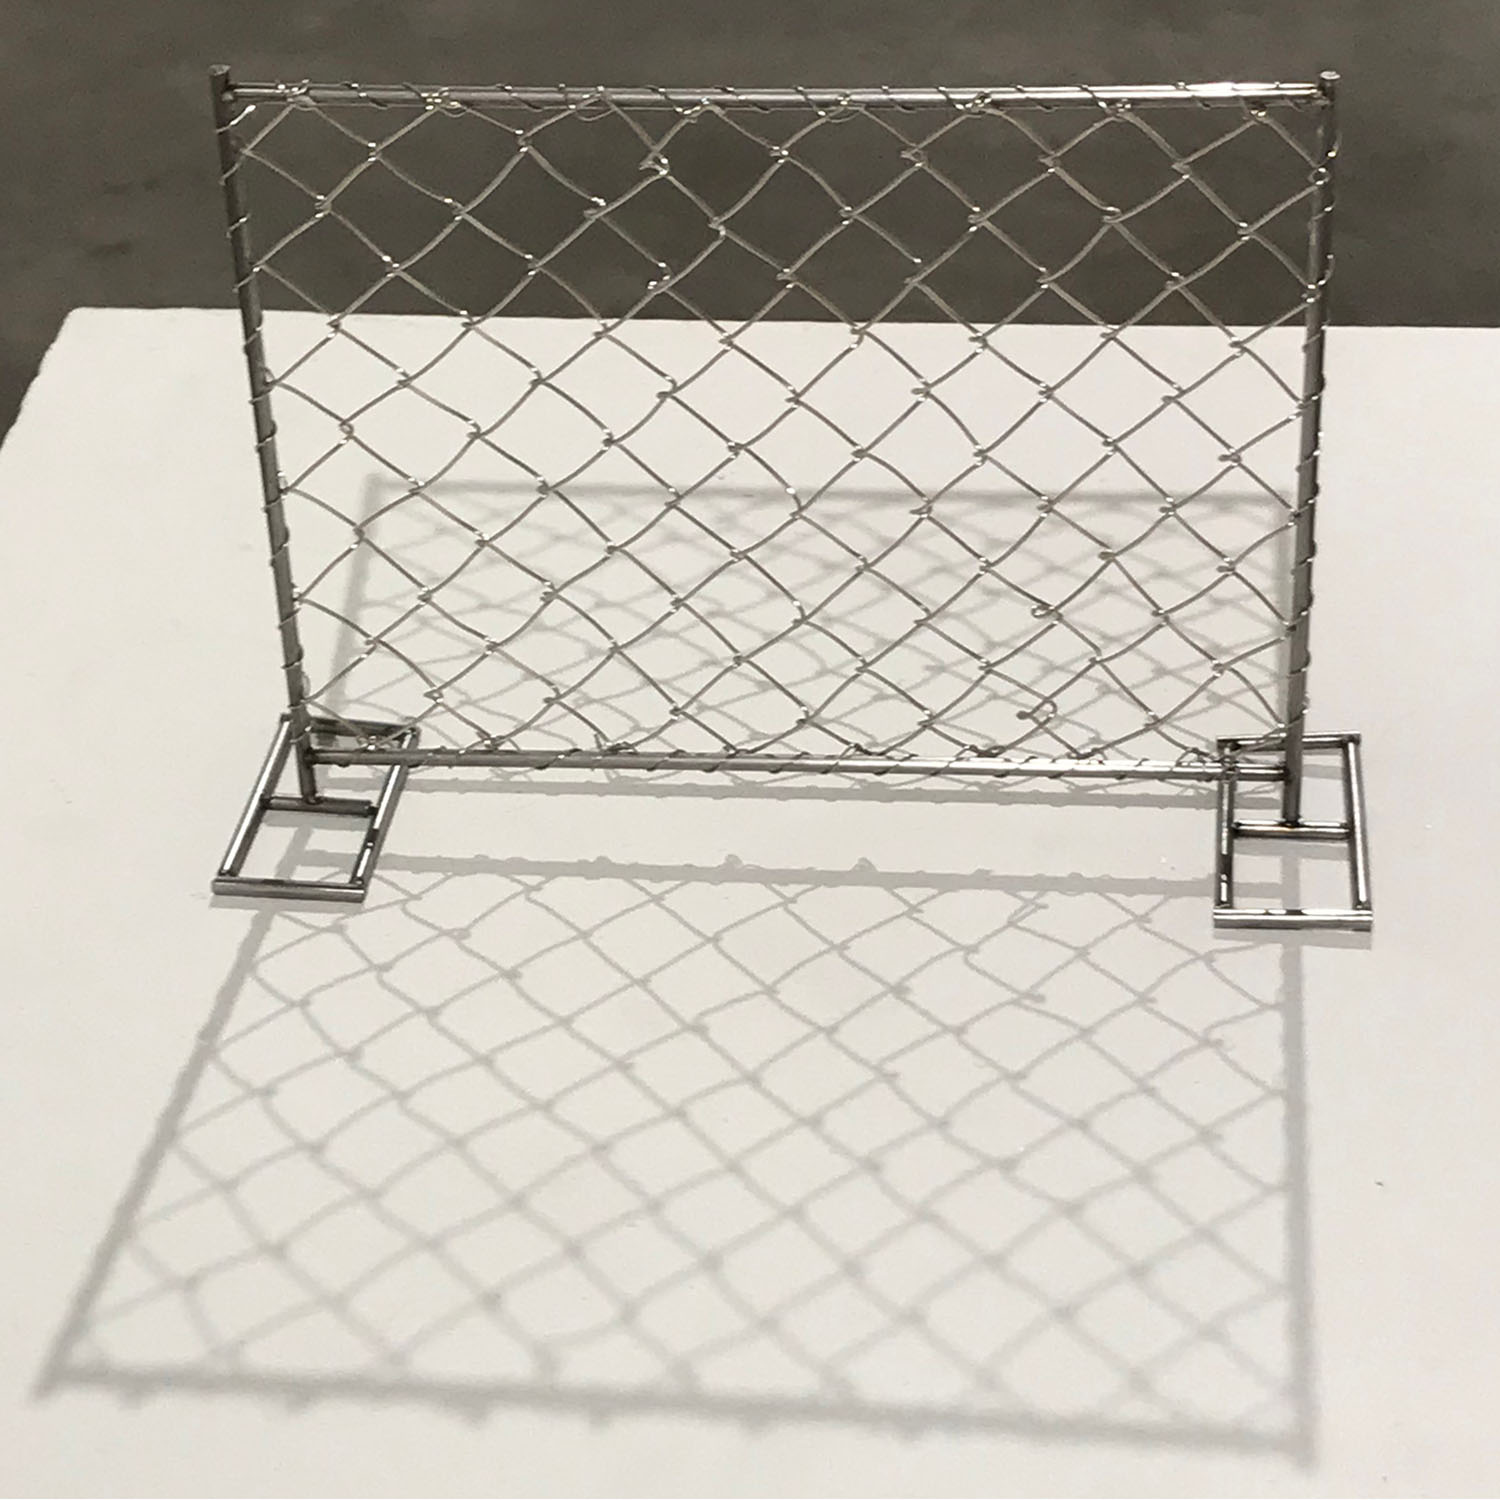 construction sculpture stand alone fence by Natalie Macellaio